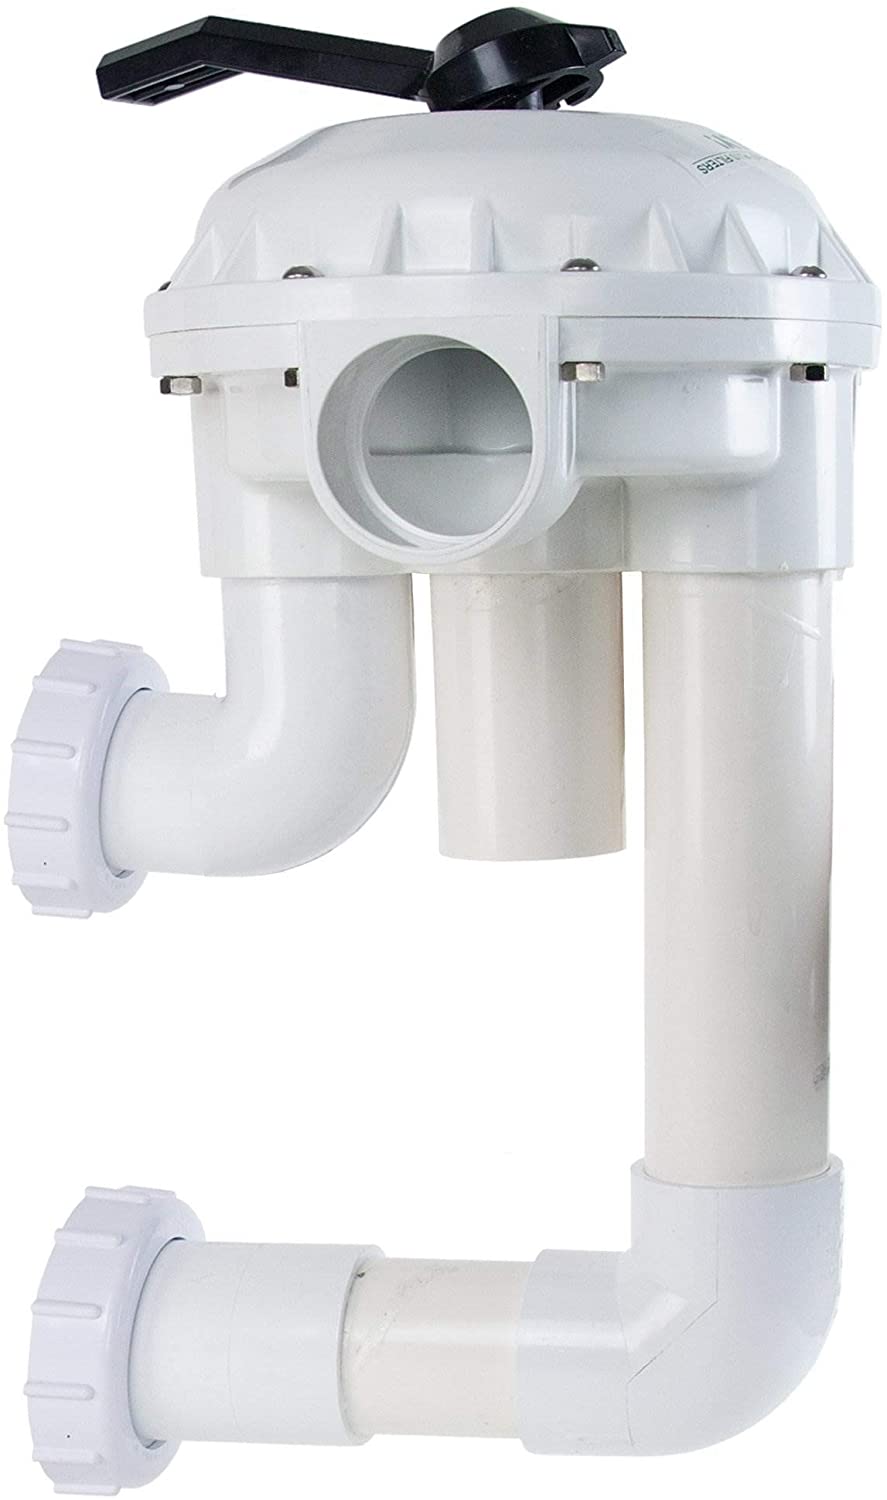 Front View of Pentair 2-Inch HiFlow Valve with Plumbing Replacement Pool and Spa D.E. Filter - ePoolSupply